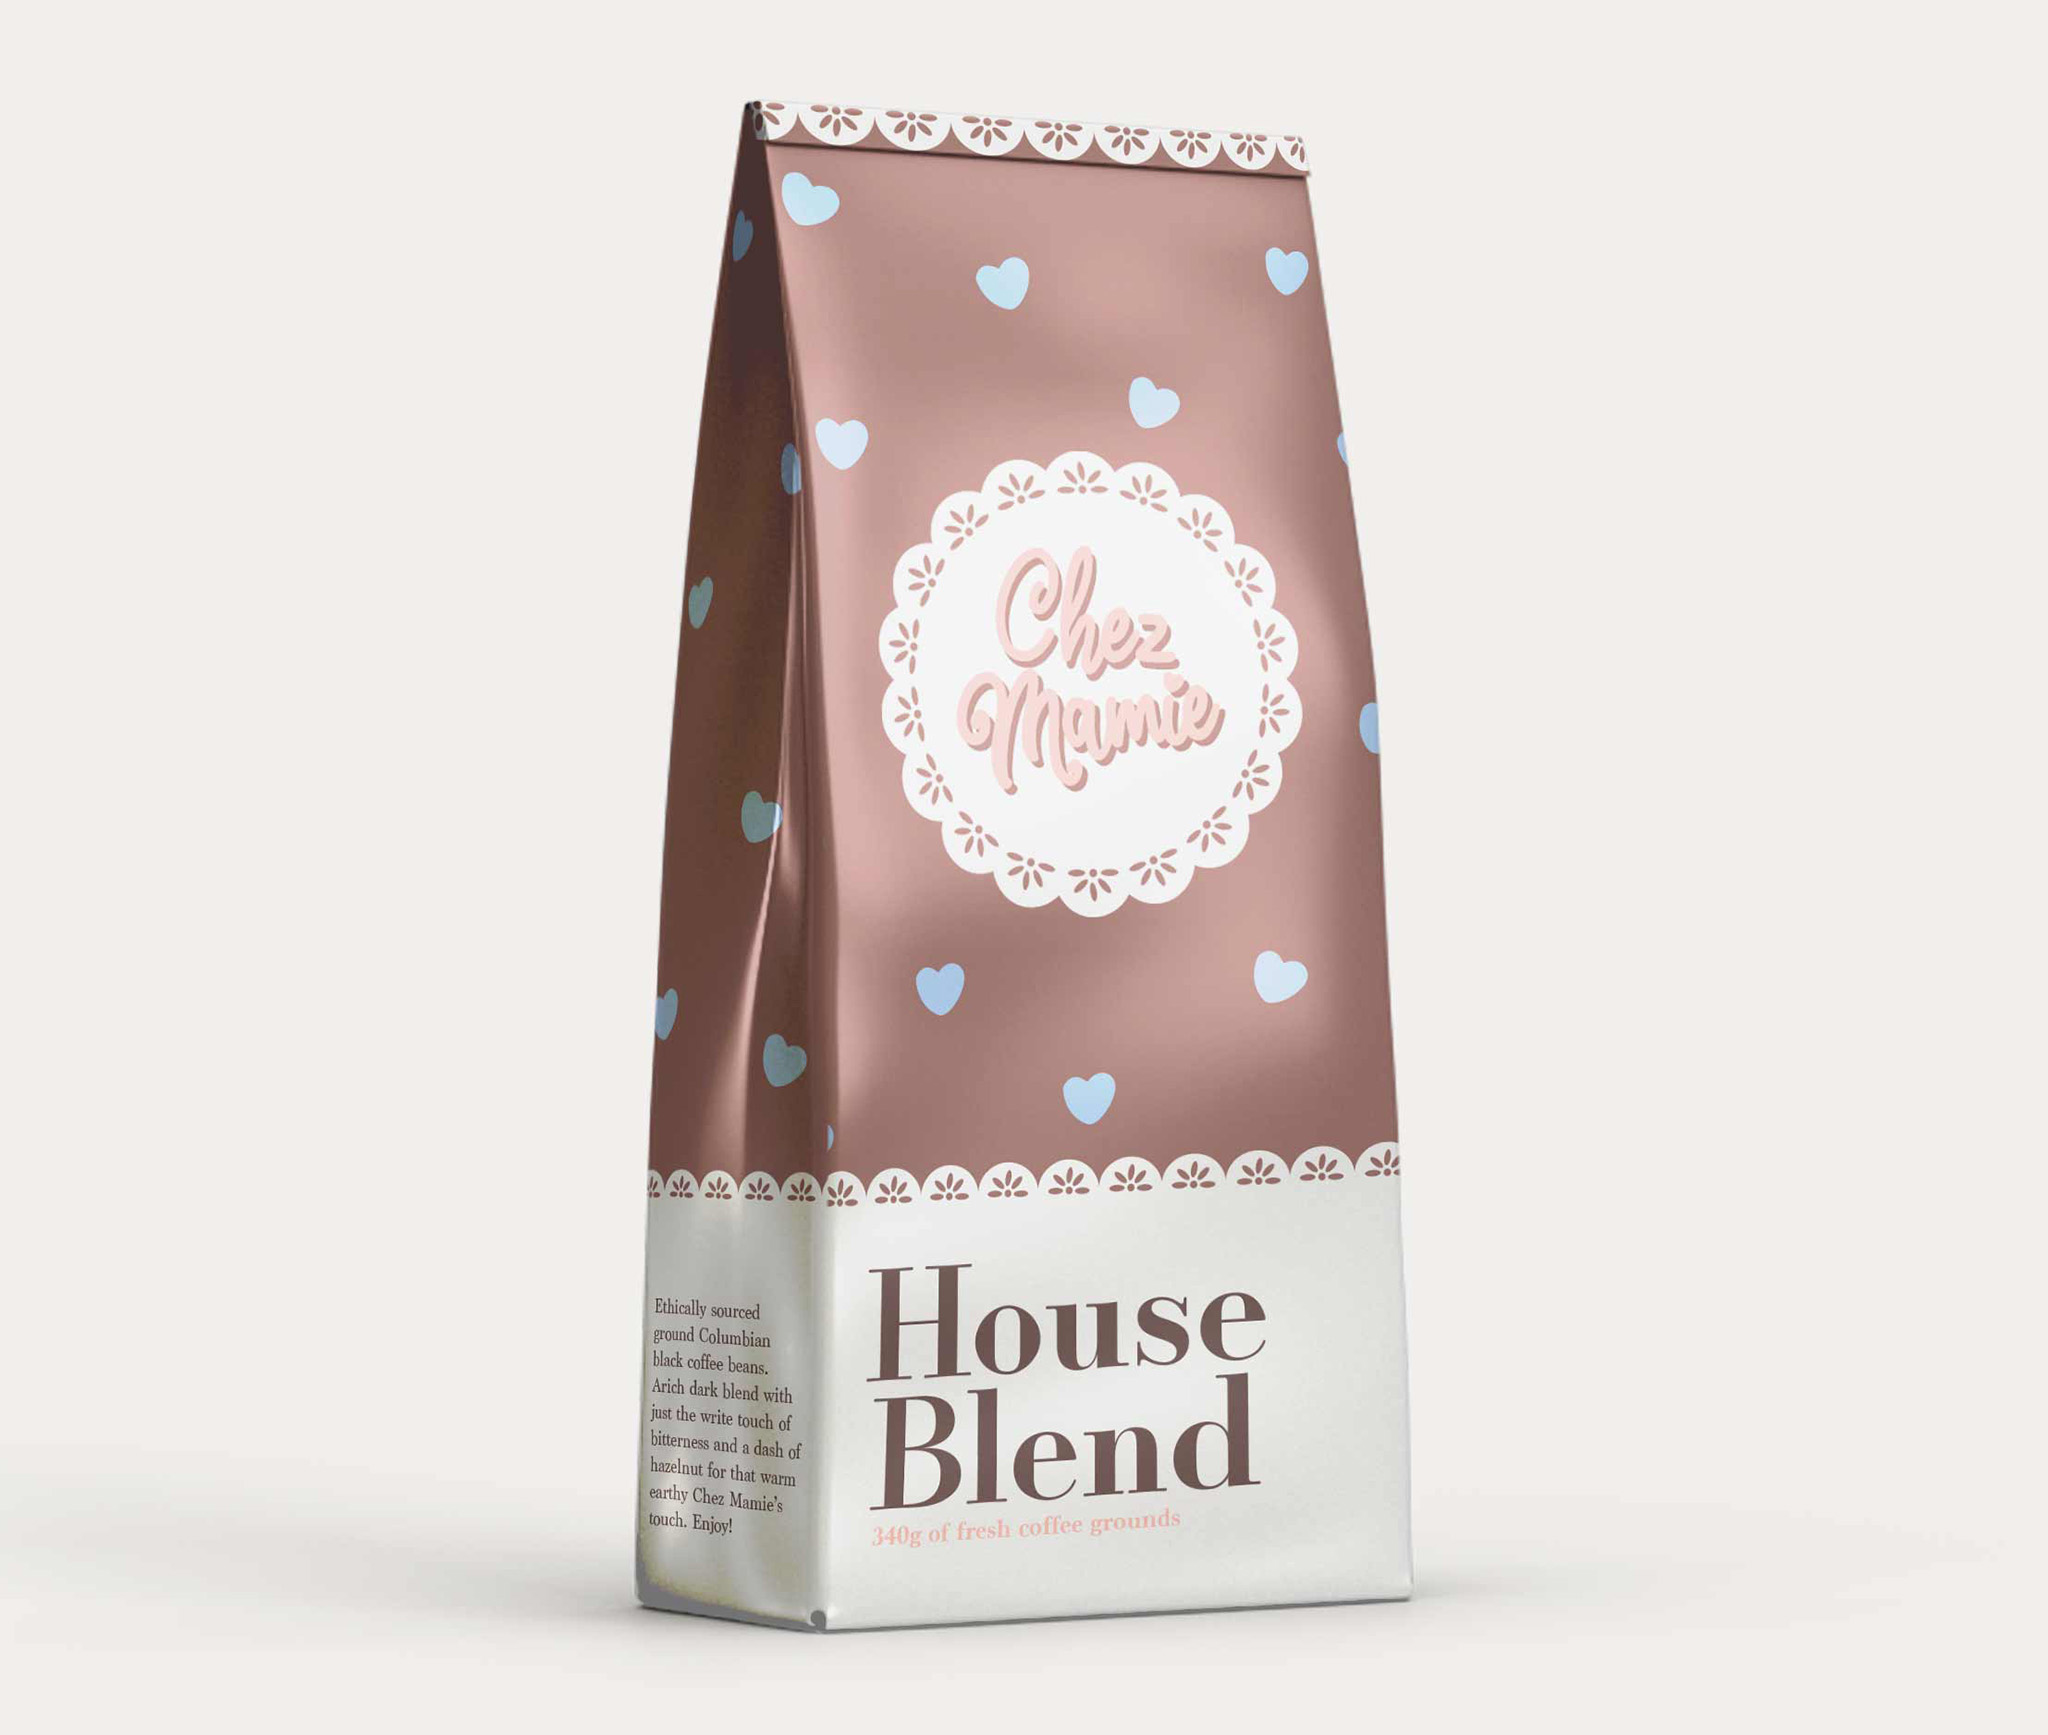 Mockup of packaging design for coffee bag or fictional company Chez Mamie. The design features a doily pattern as well as a brown background with blue hearts, the logo and the text "house Blend" on the front.